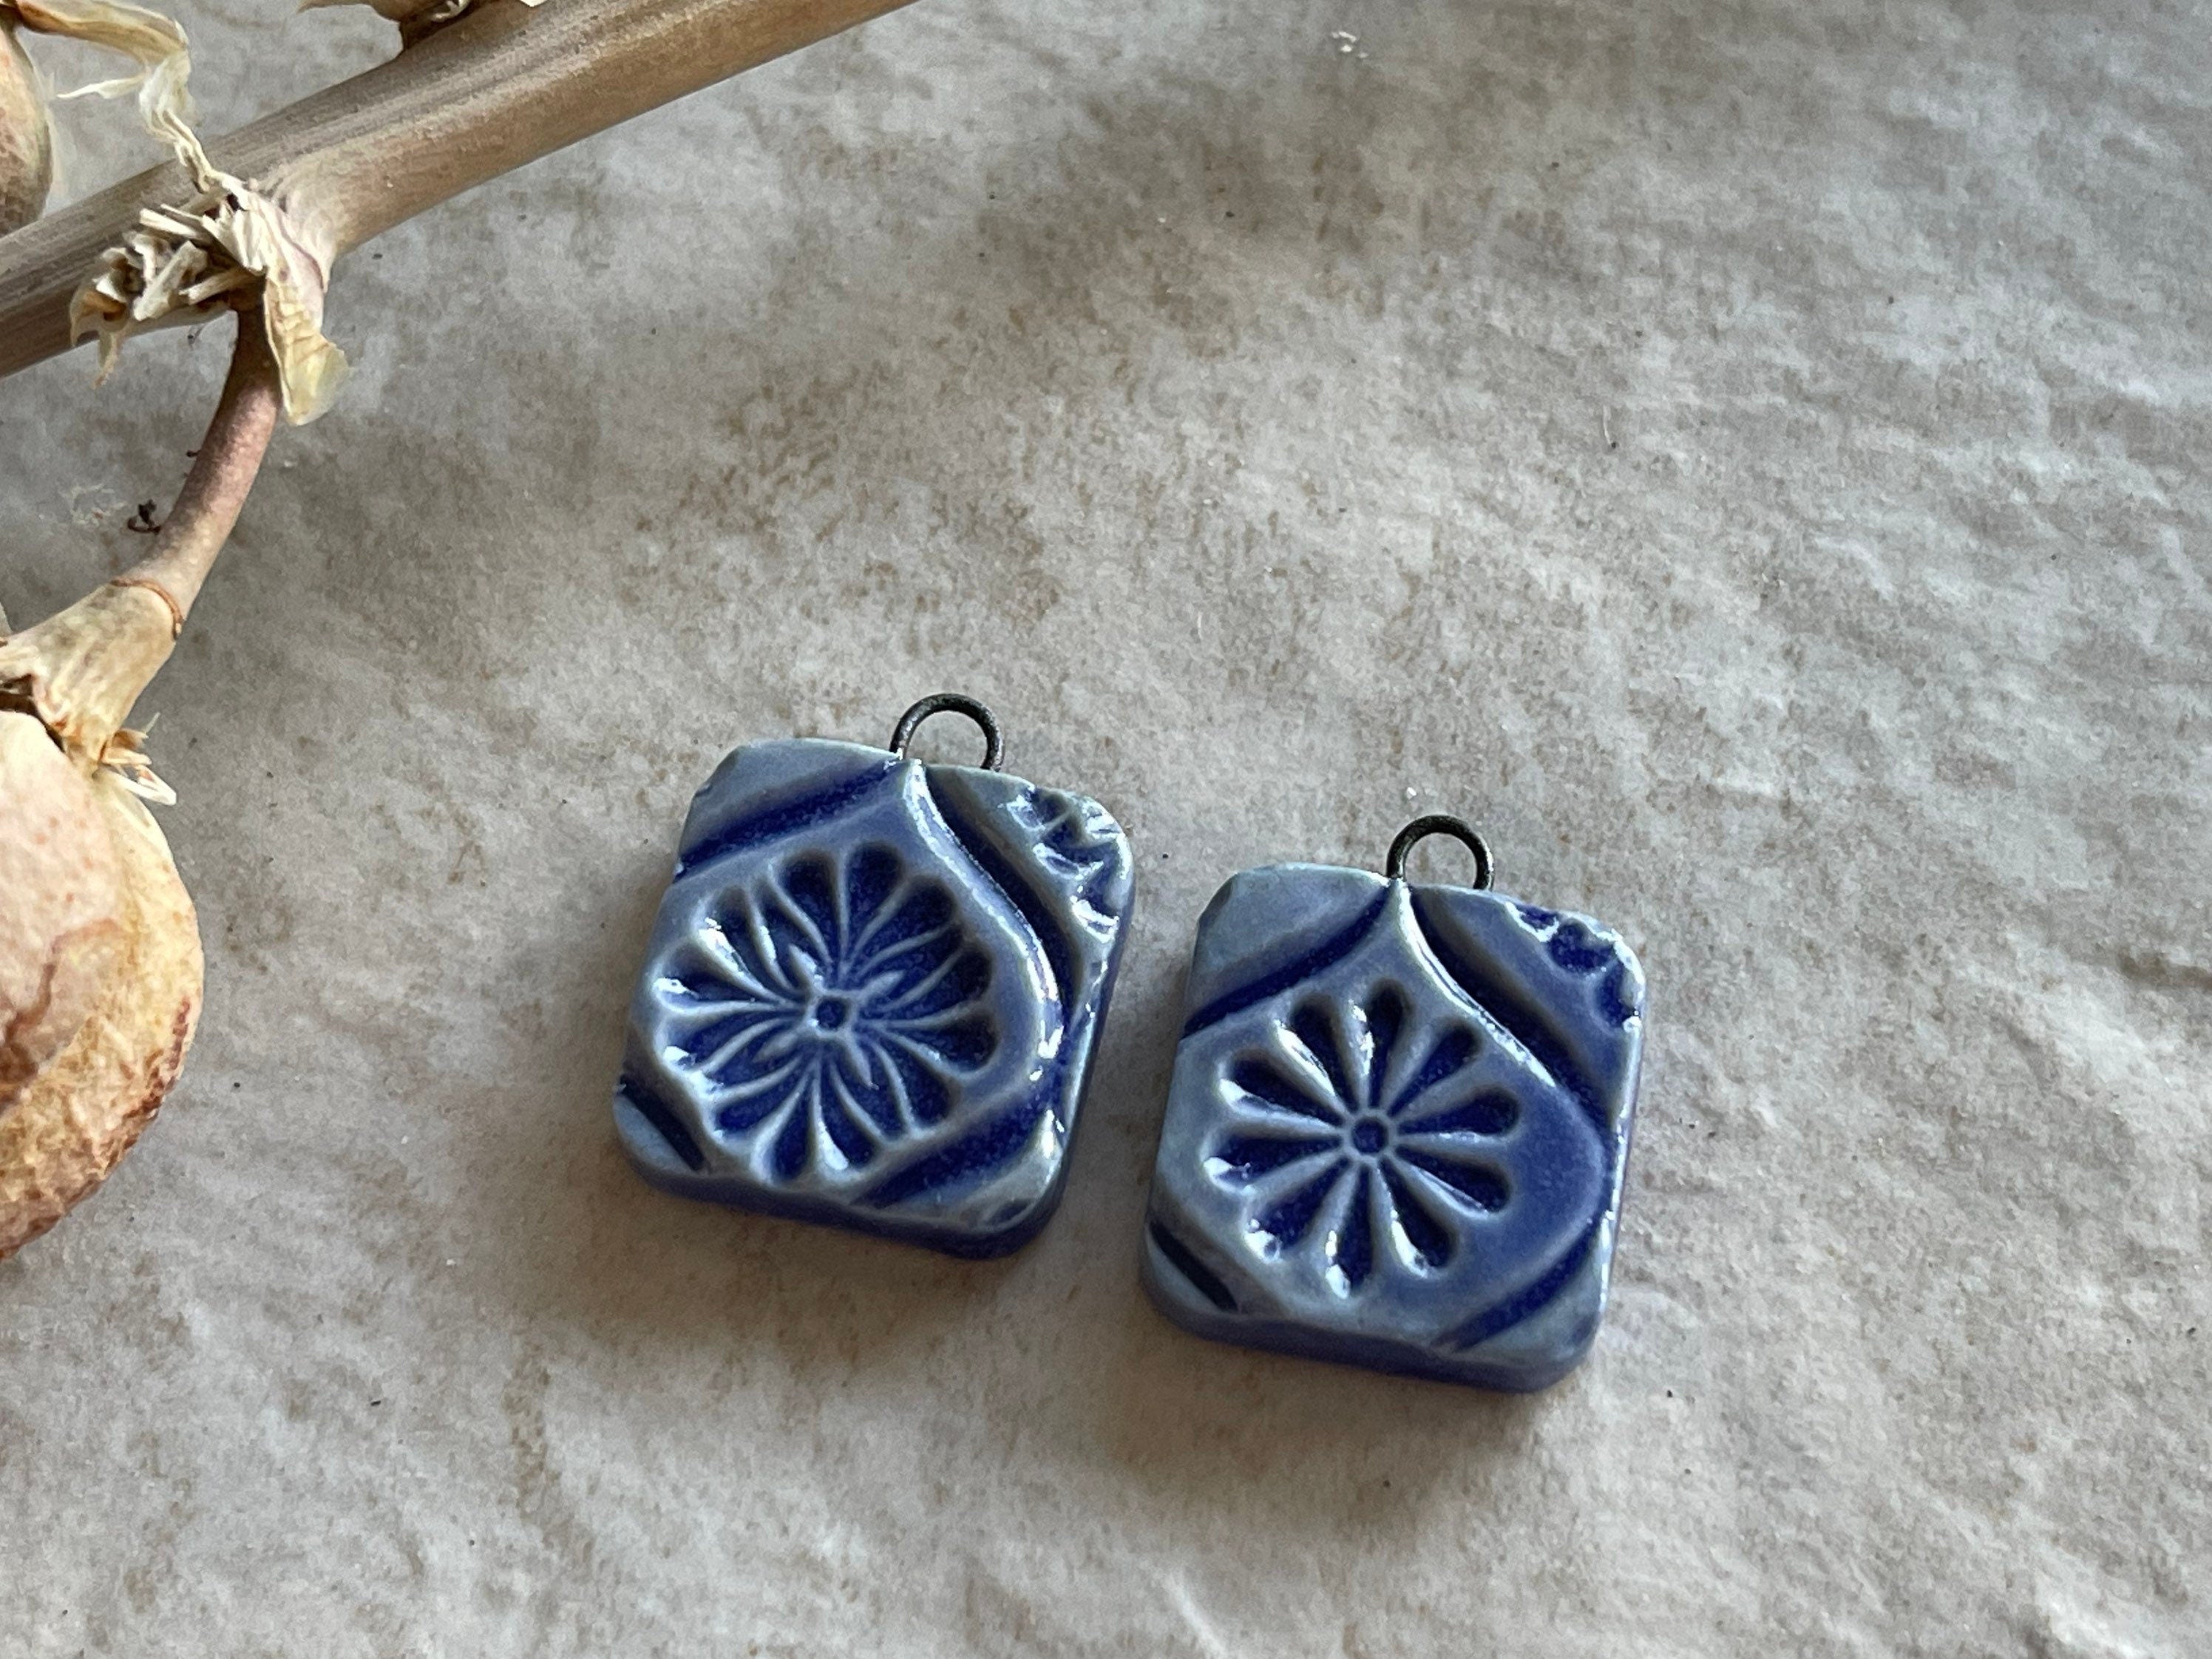 Blue Earring Bead Pair, Porcelain Ceramic Charms, Jewelry Making Components, Beading Handmade